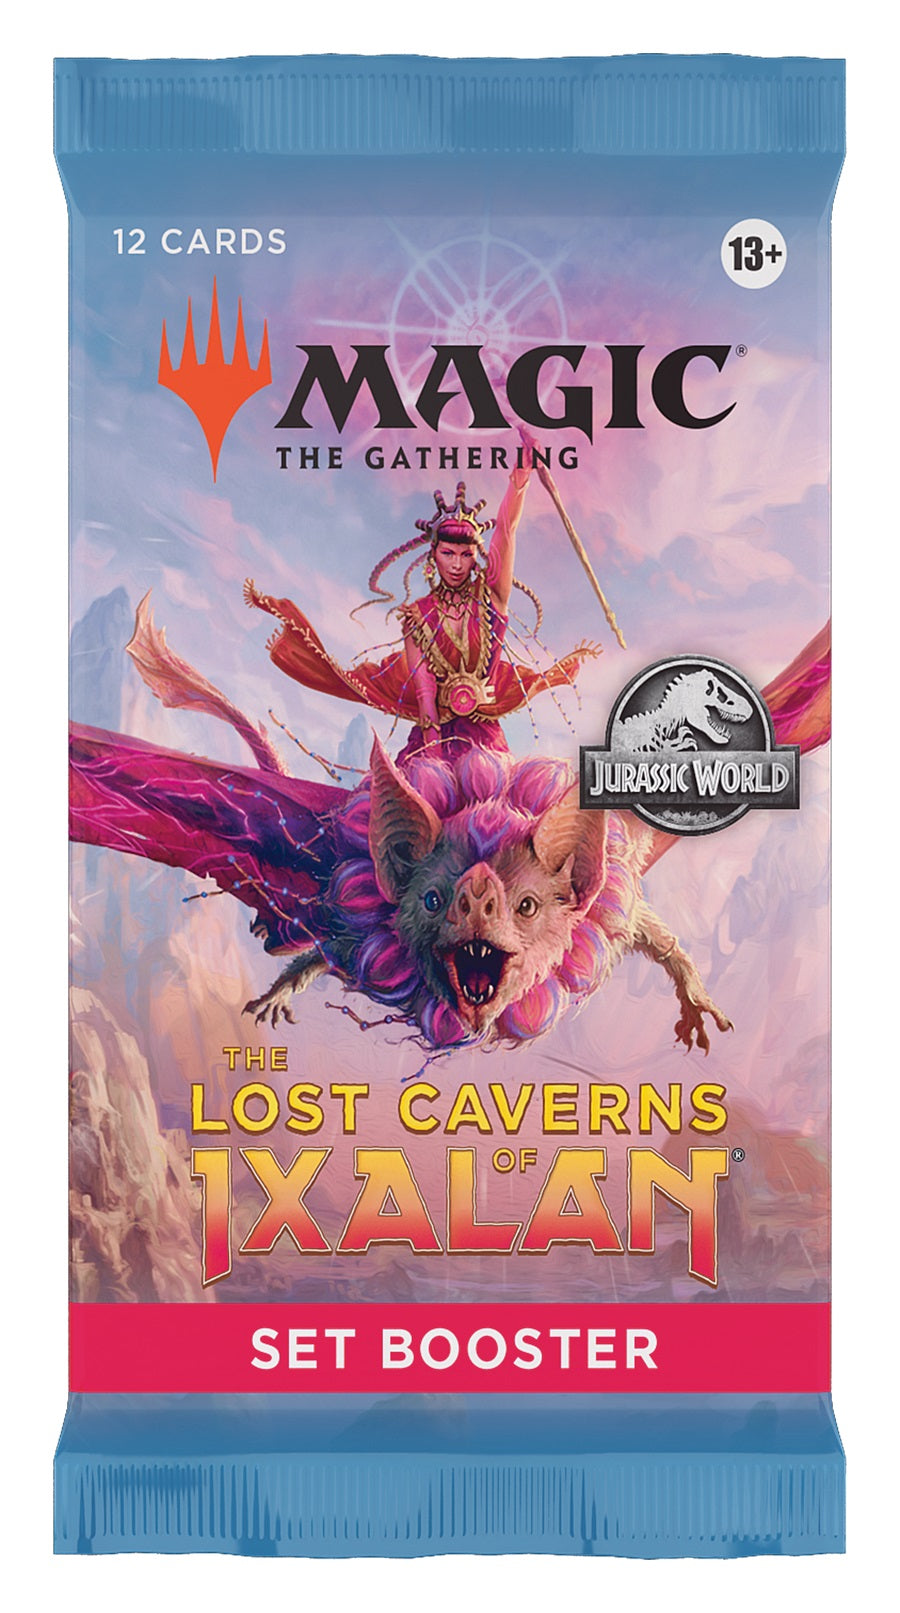 Magic The Gathering (MTG) - The Lost Caverns of Ixalan Set Booster Loose Booster Pack